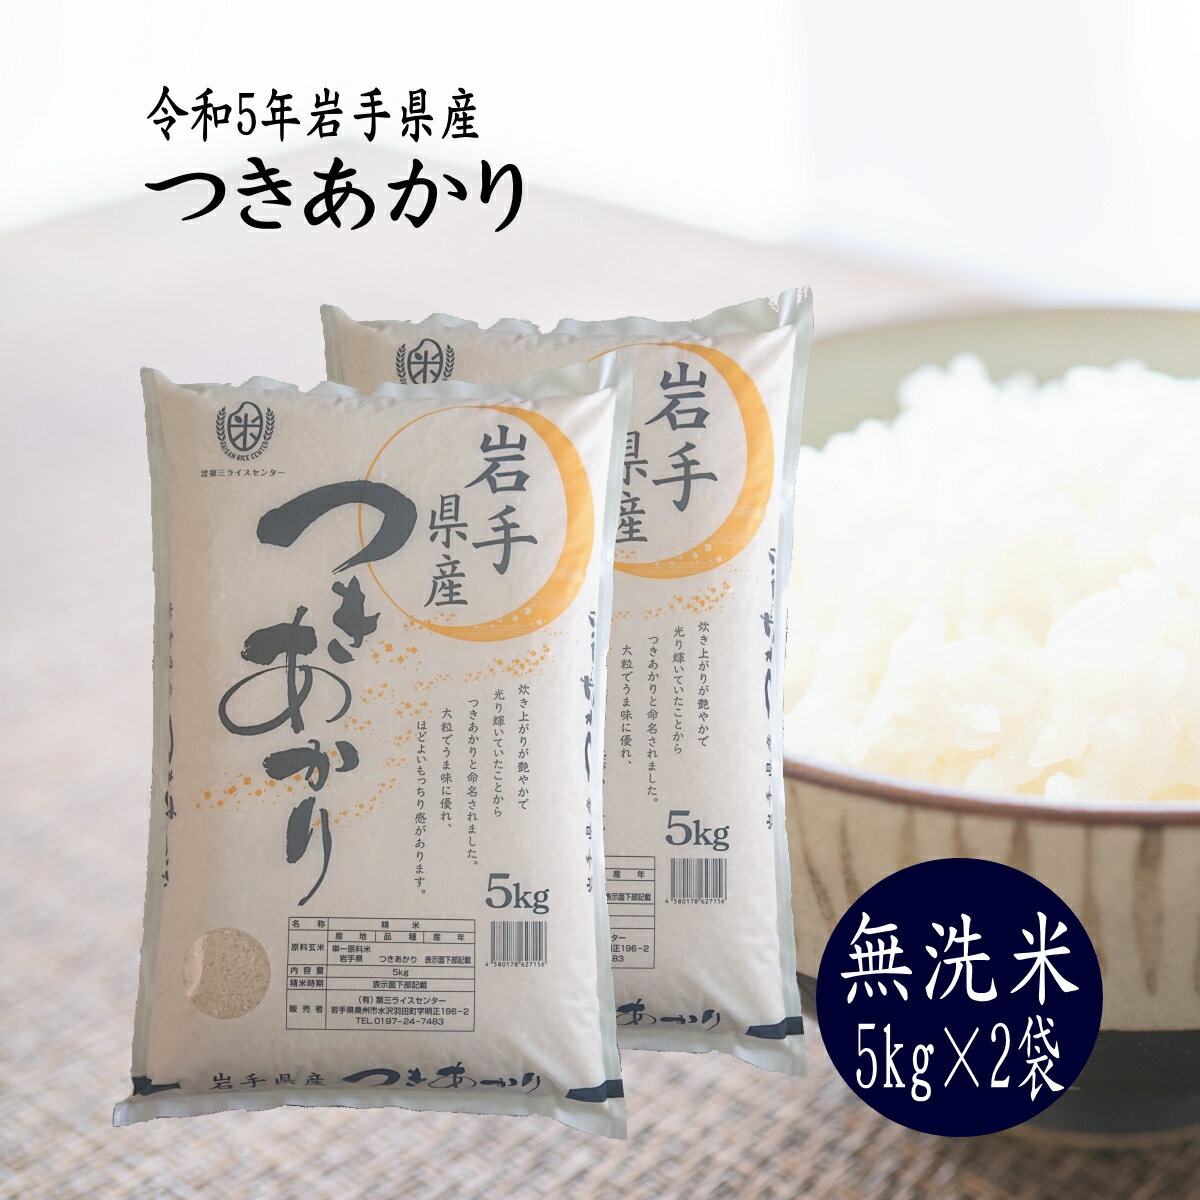 10kg 無洗米 つきあかり 送料無料 お米 5kg×2袋 精米 ライス 令和5年 コメ ご飯 岩手県産